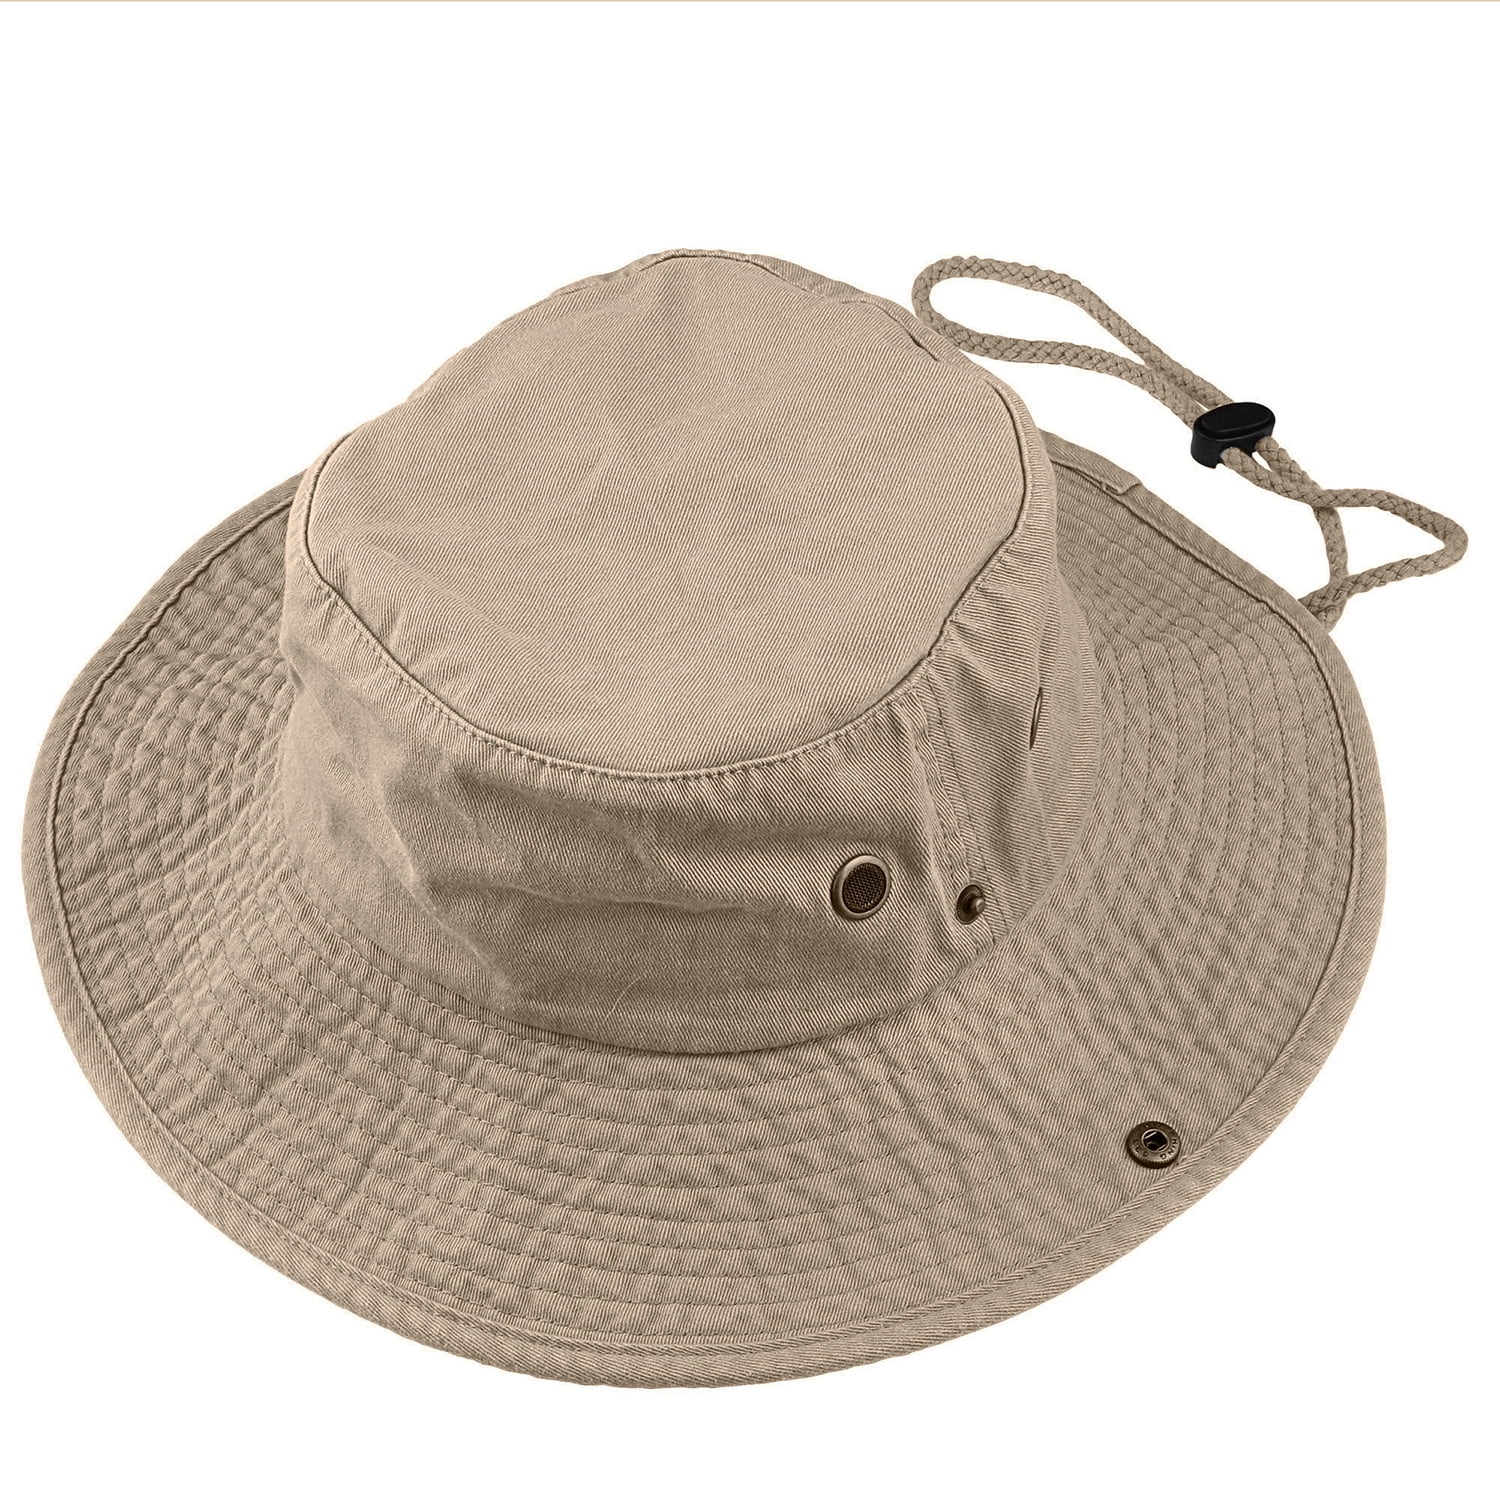 Clakllie Jungle Boonie Sun Hat Quick Drying Outdoor Fishing Cap